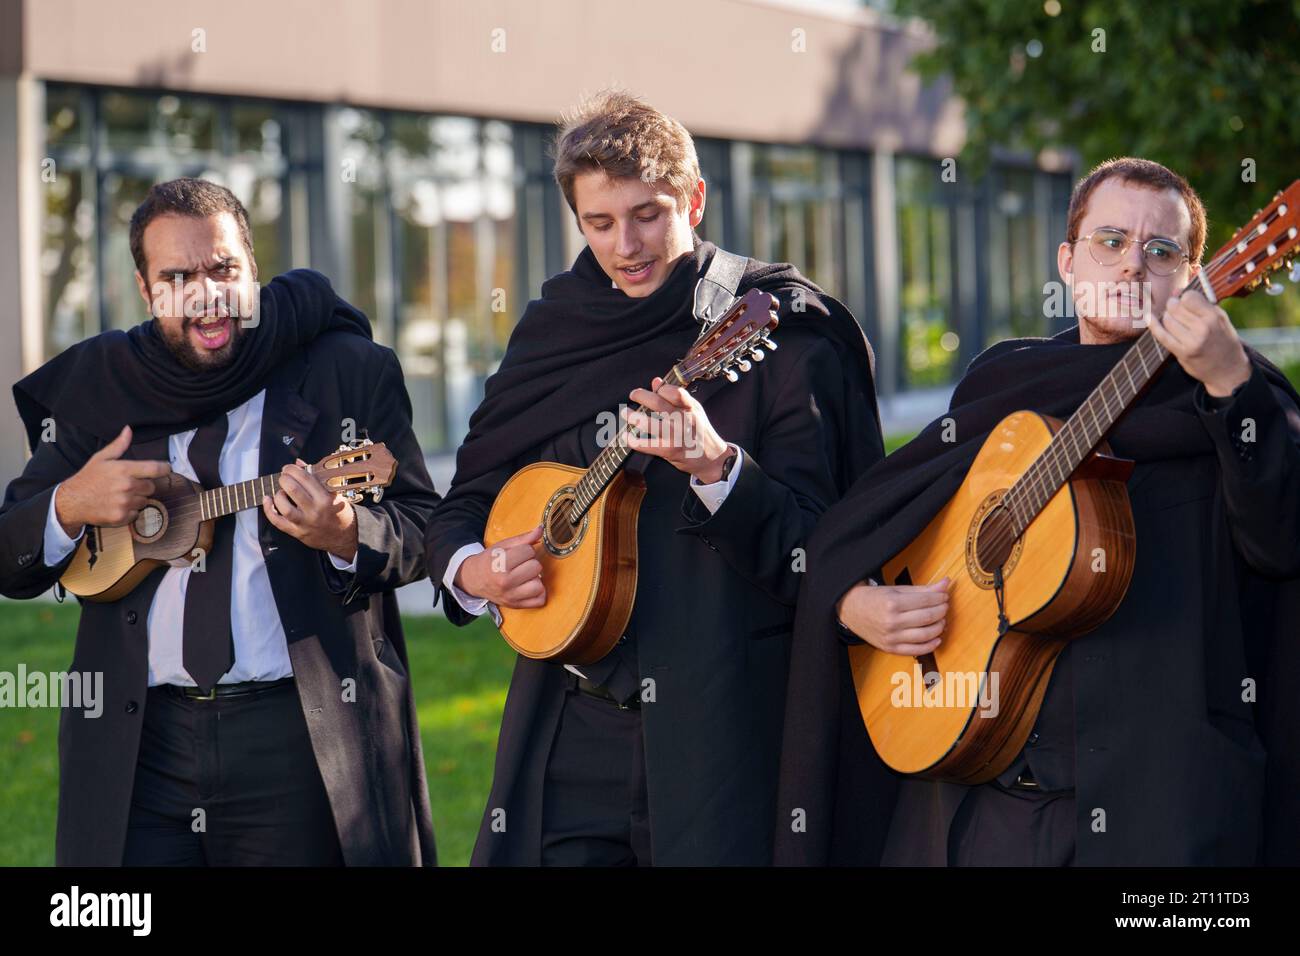 Students with traditional academic attire and black cape sing and play musical instruments as members of the Estudantina Universitária de Coimbra Stock Photo